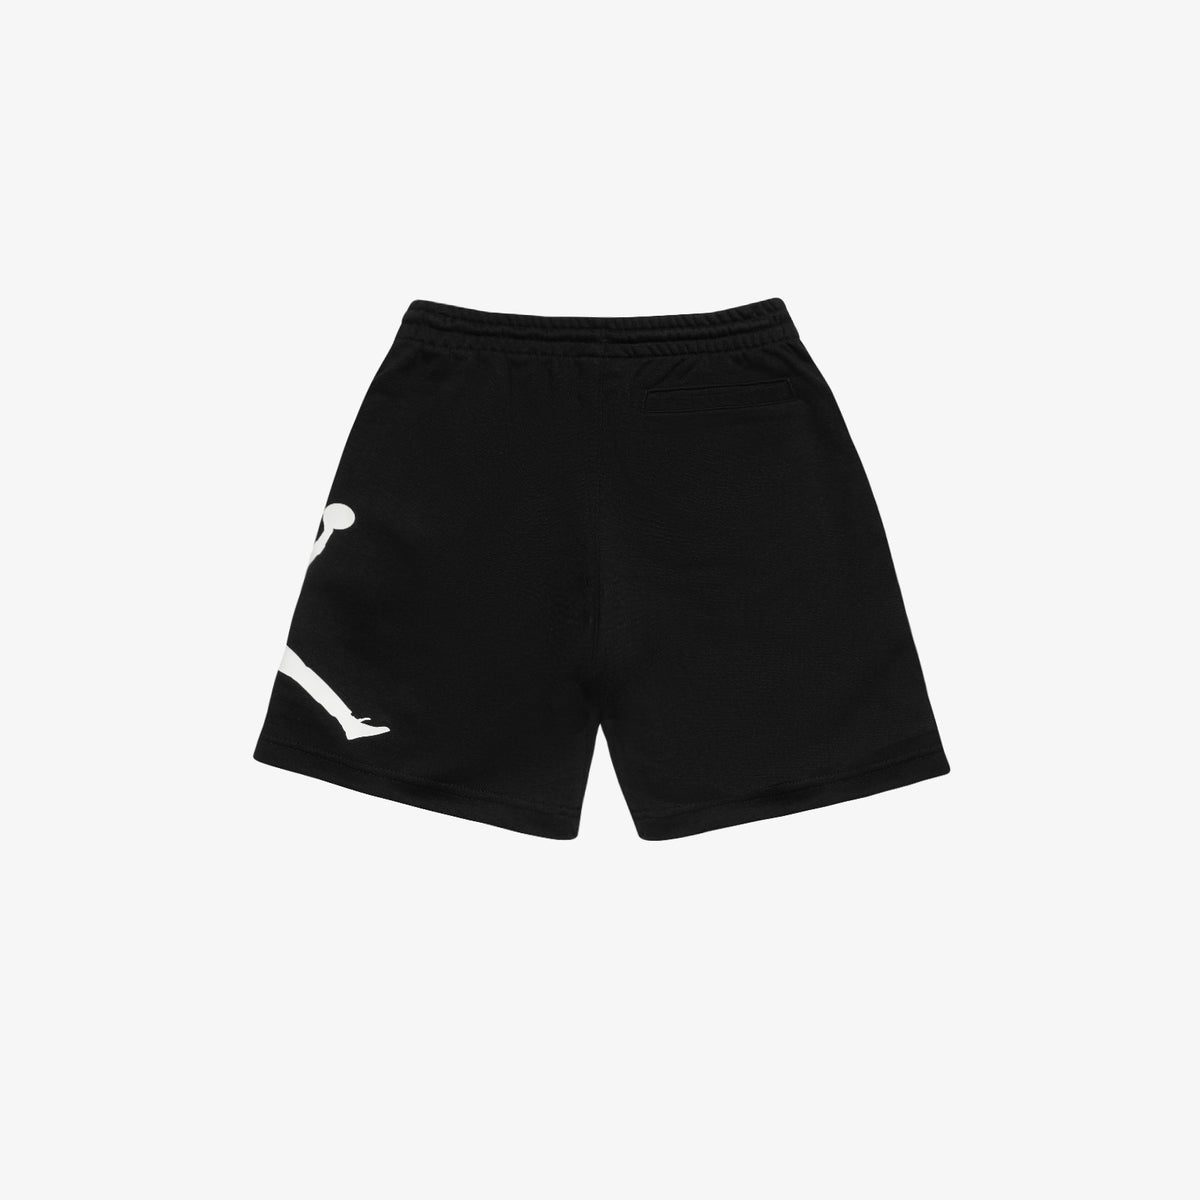 Jumpman Air French Terry Youth Shorts - Black